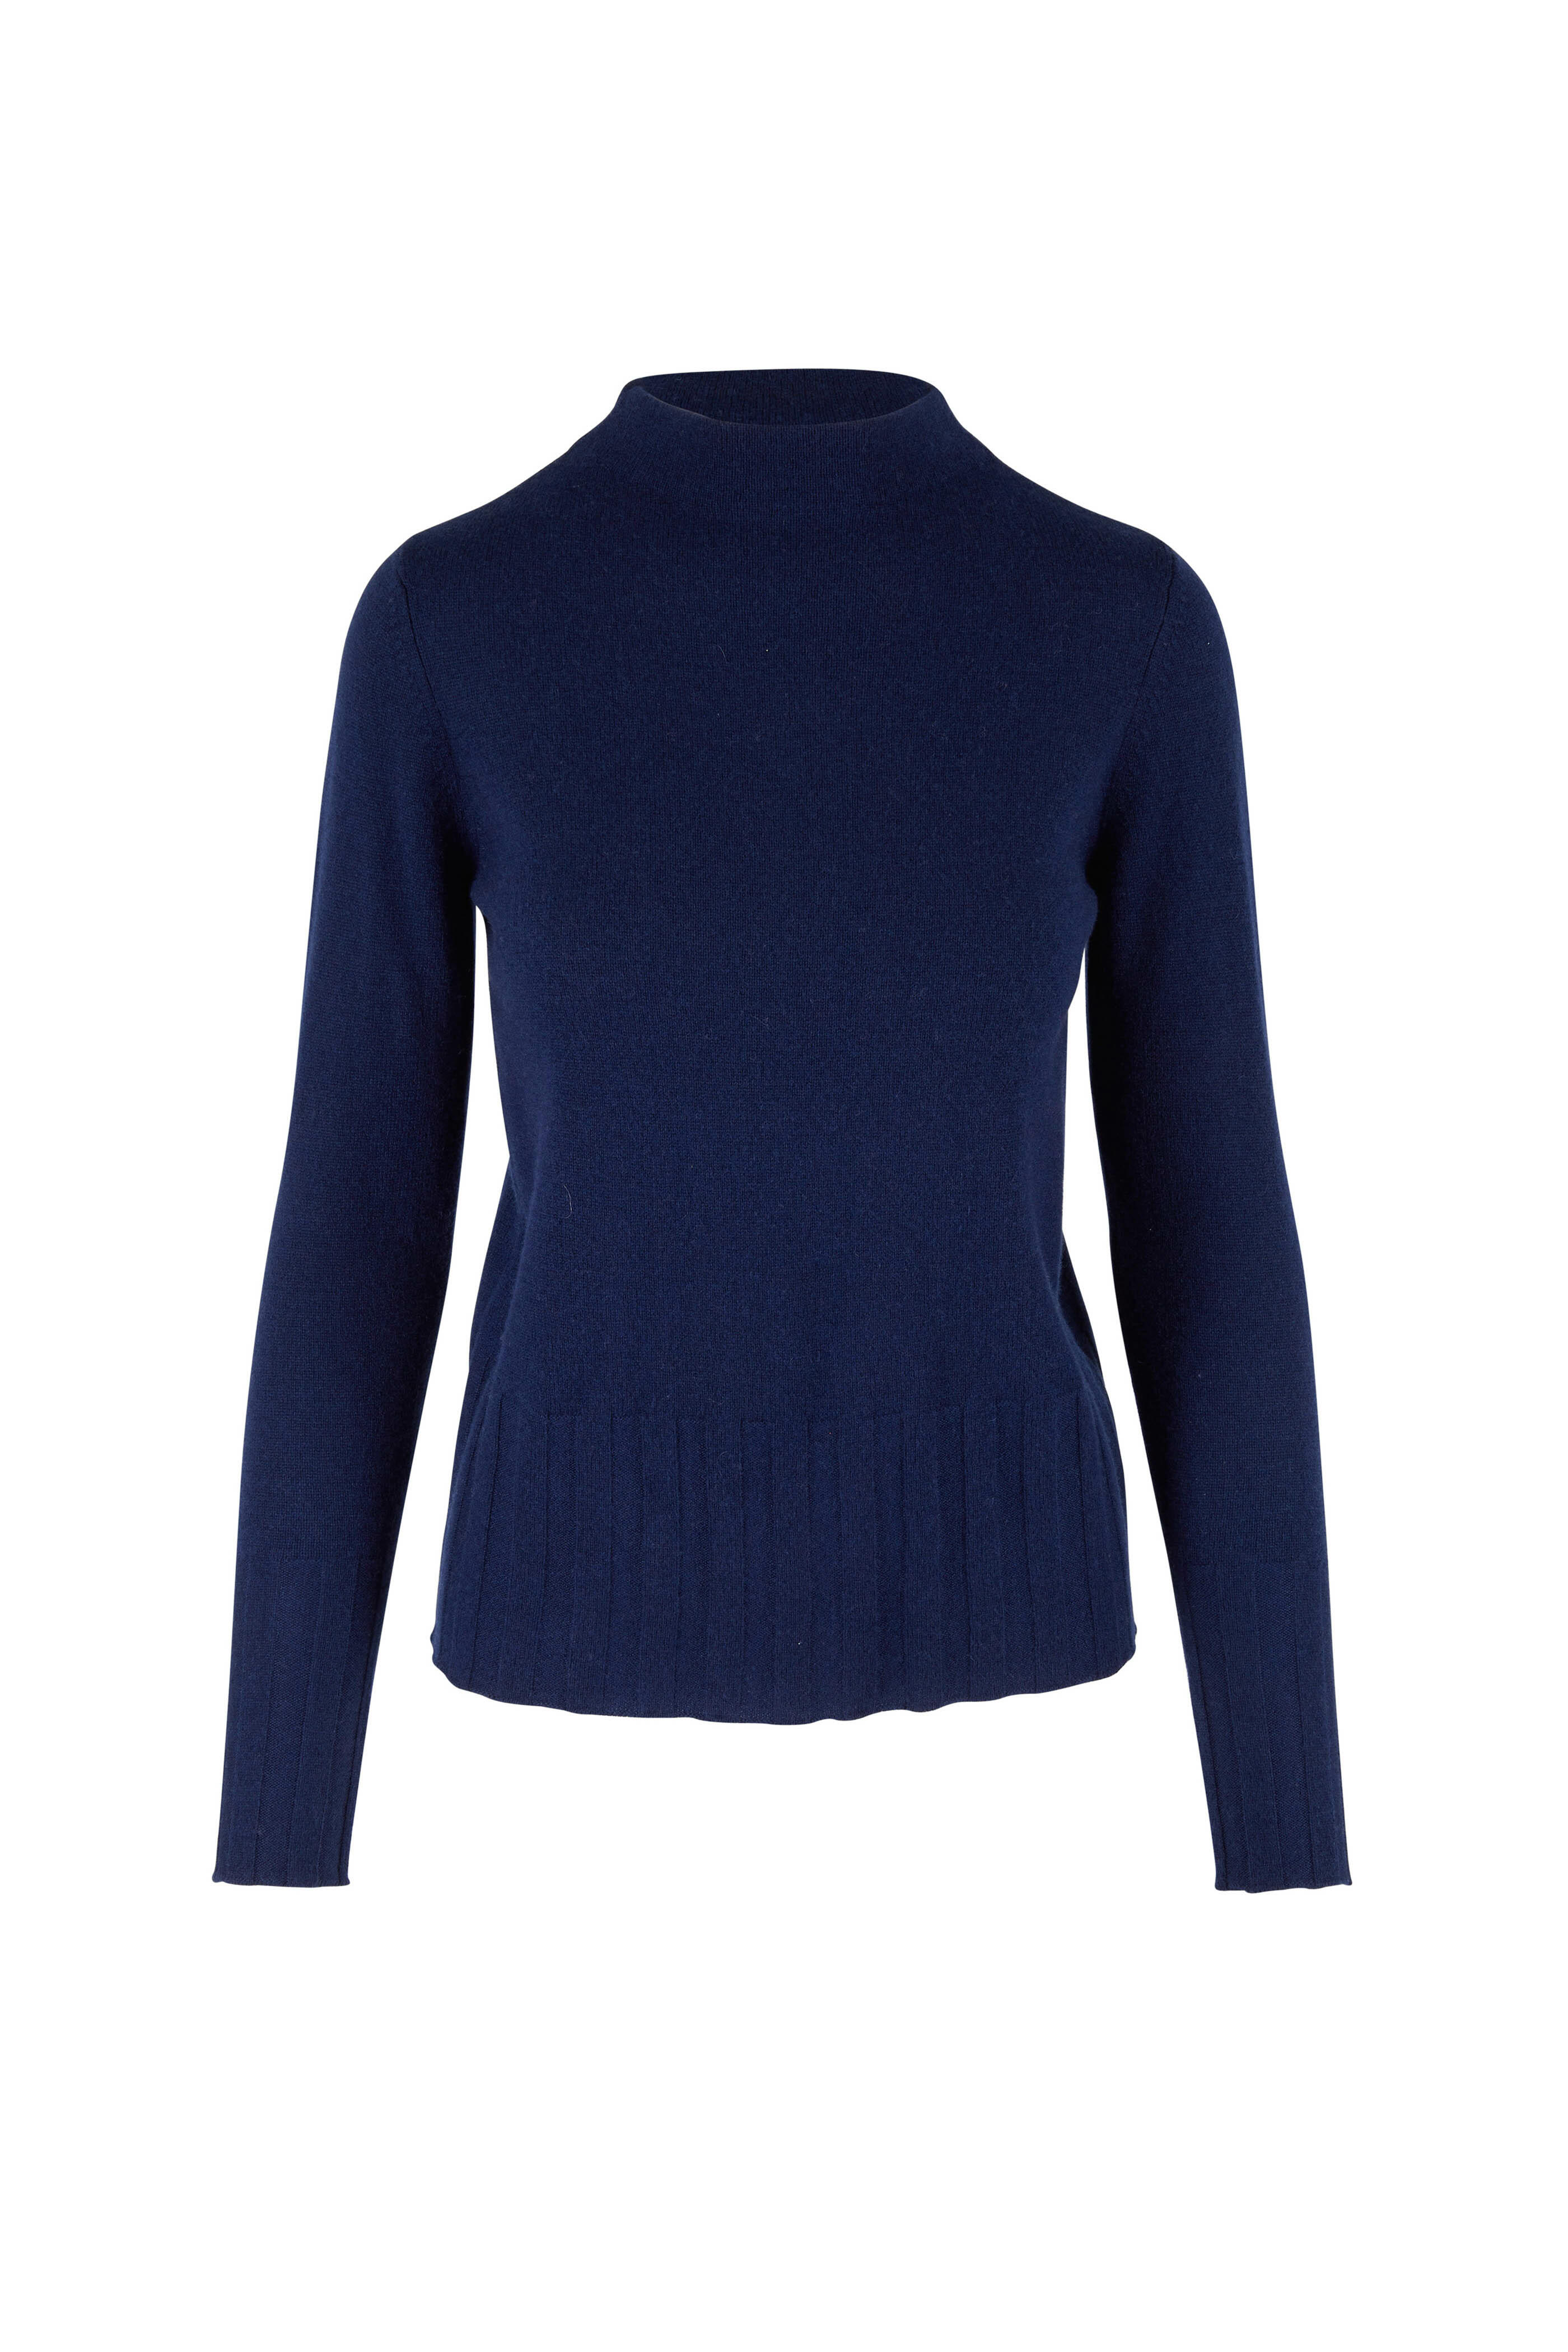 Kinross - Navy Cashmere Funnel Neck Sweater | Mitchell Stores